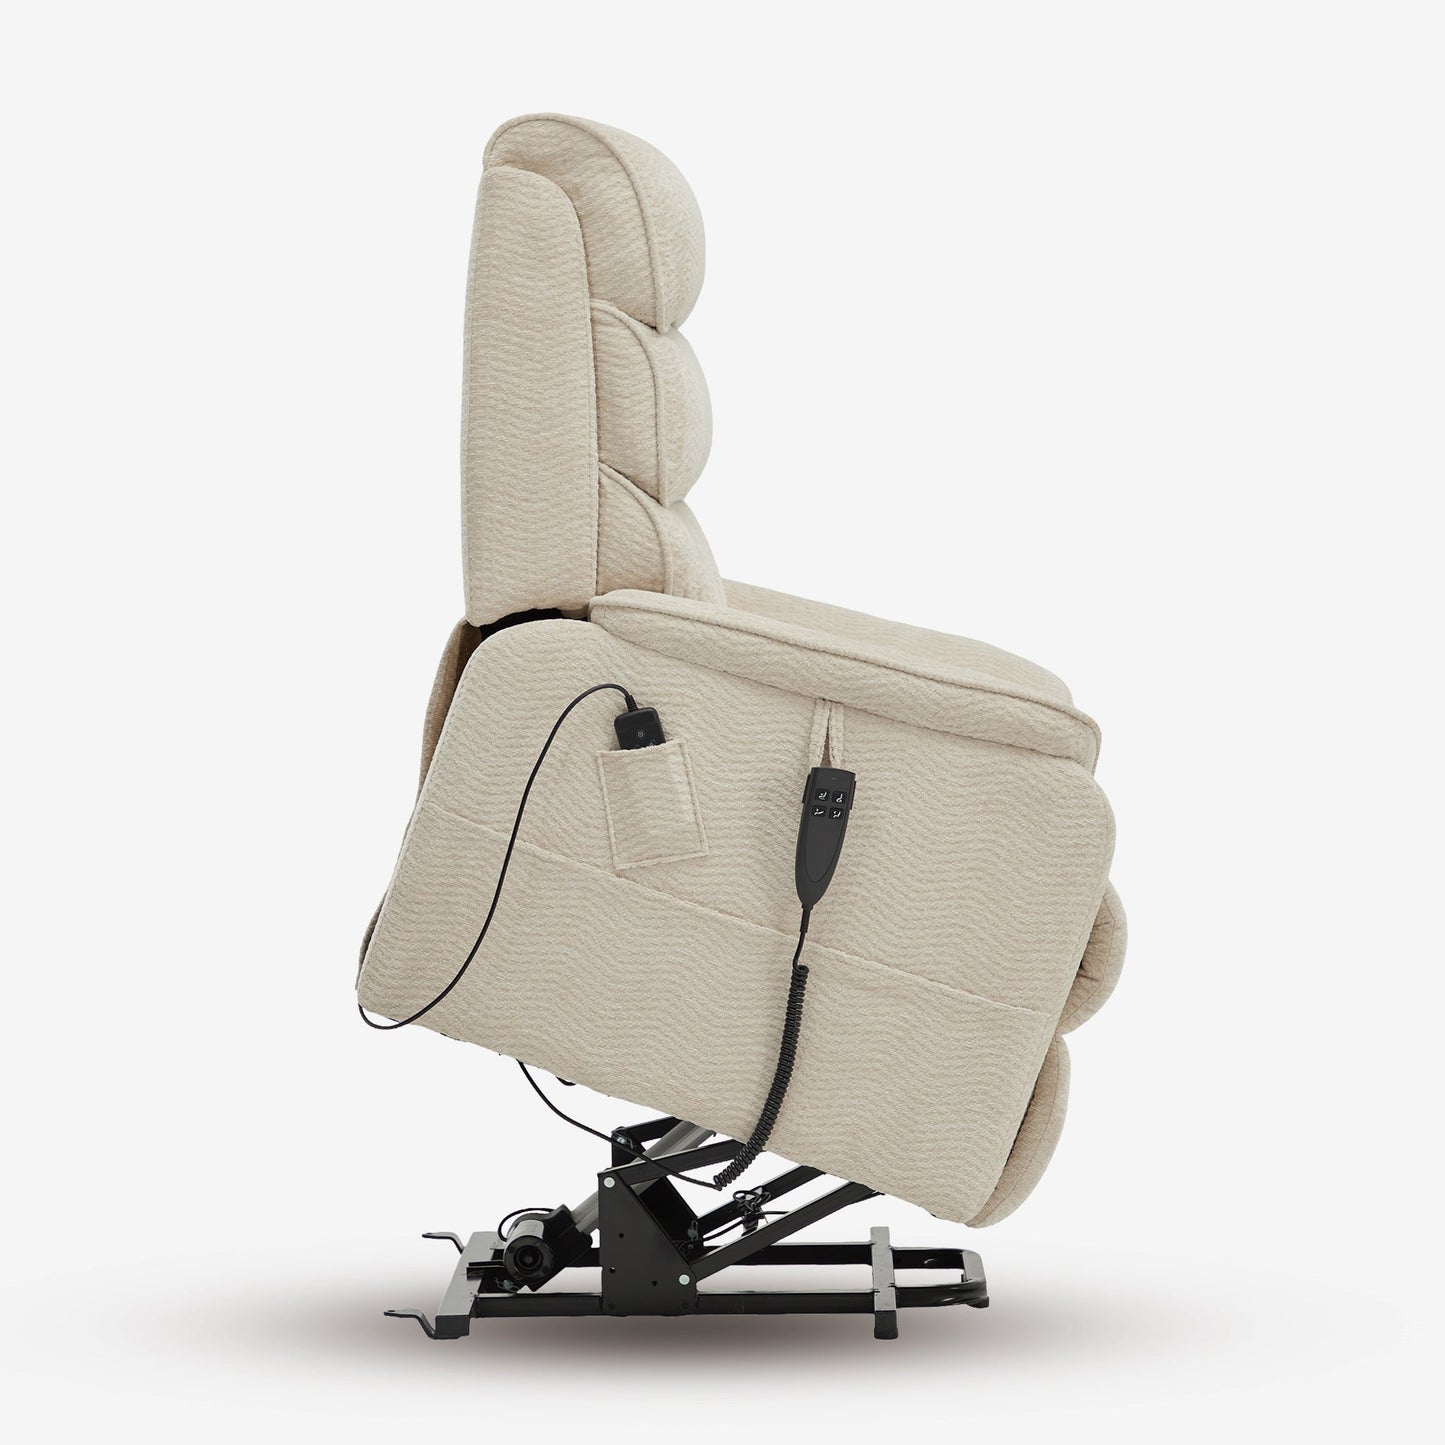 Lift And Recline Chairs With Heat&Massage And Infinite Positions